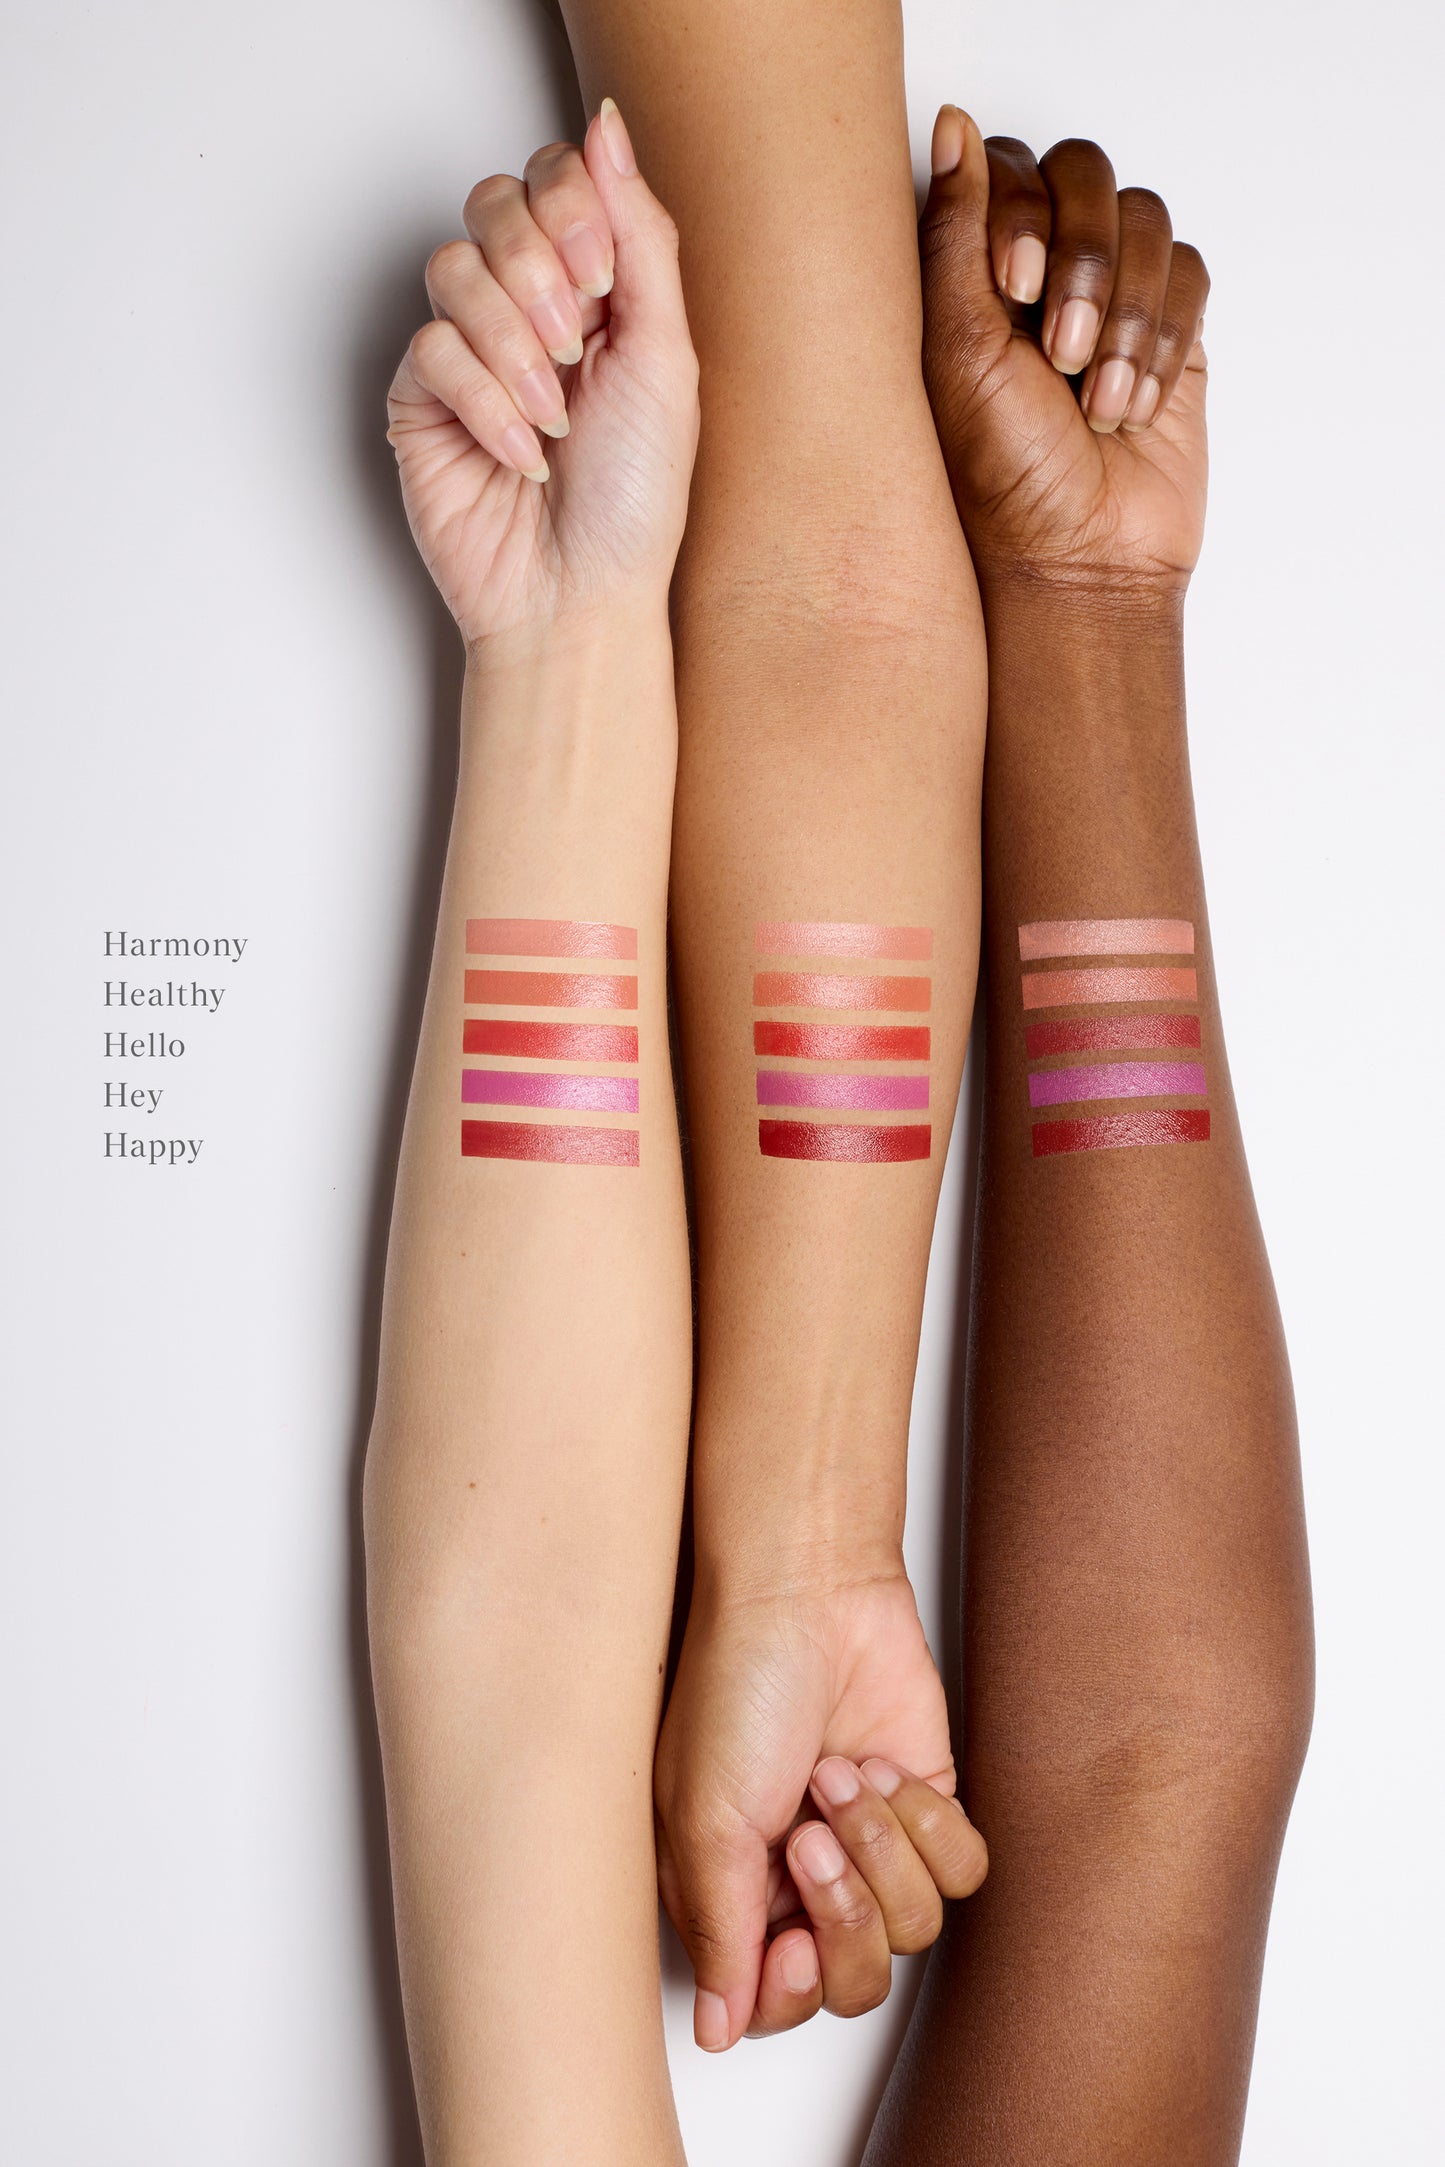 Three arms lined up next to each other with cream blush swatches on the skin. There are five swatch stripes on each of the three arms. The arm on the left is fair, the middle is golden and the arm on the right is deep. Their nails are unpainted and their hands are semi-closed in a relaxed state.